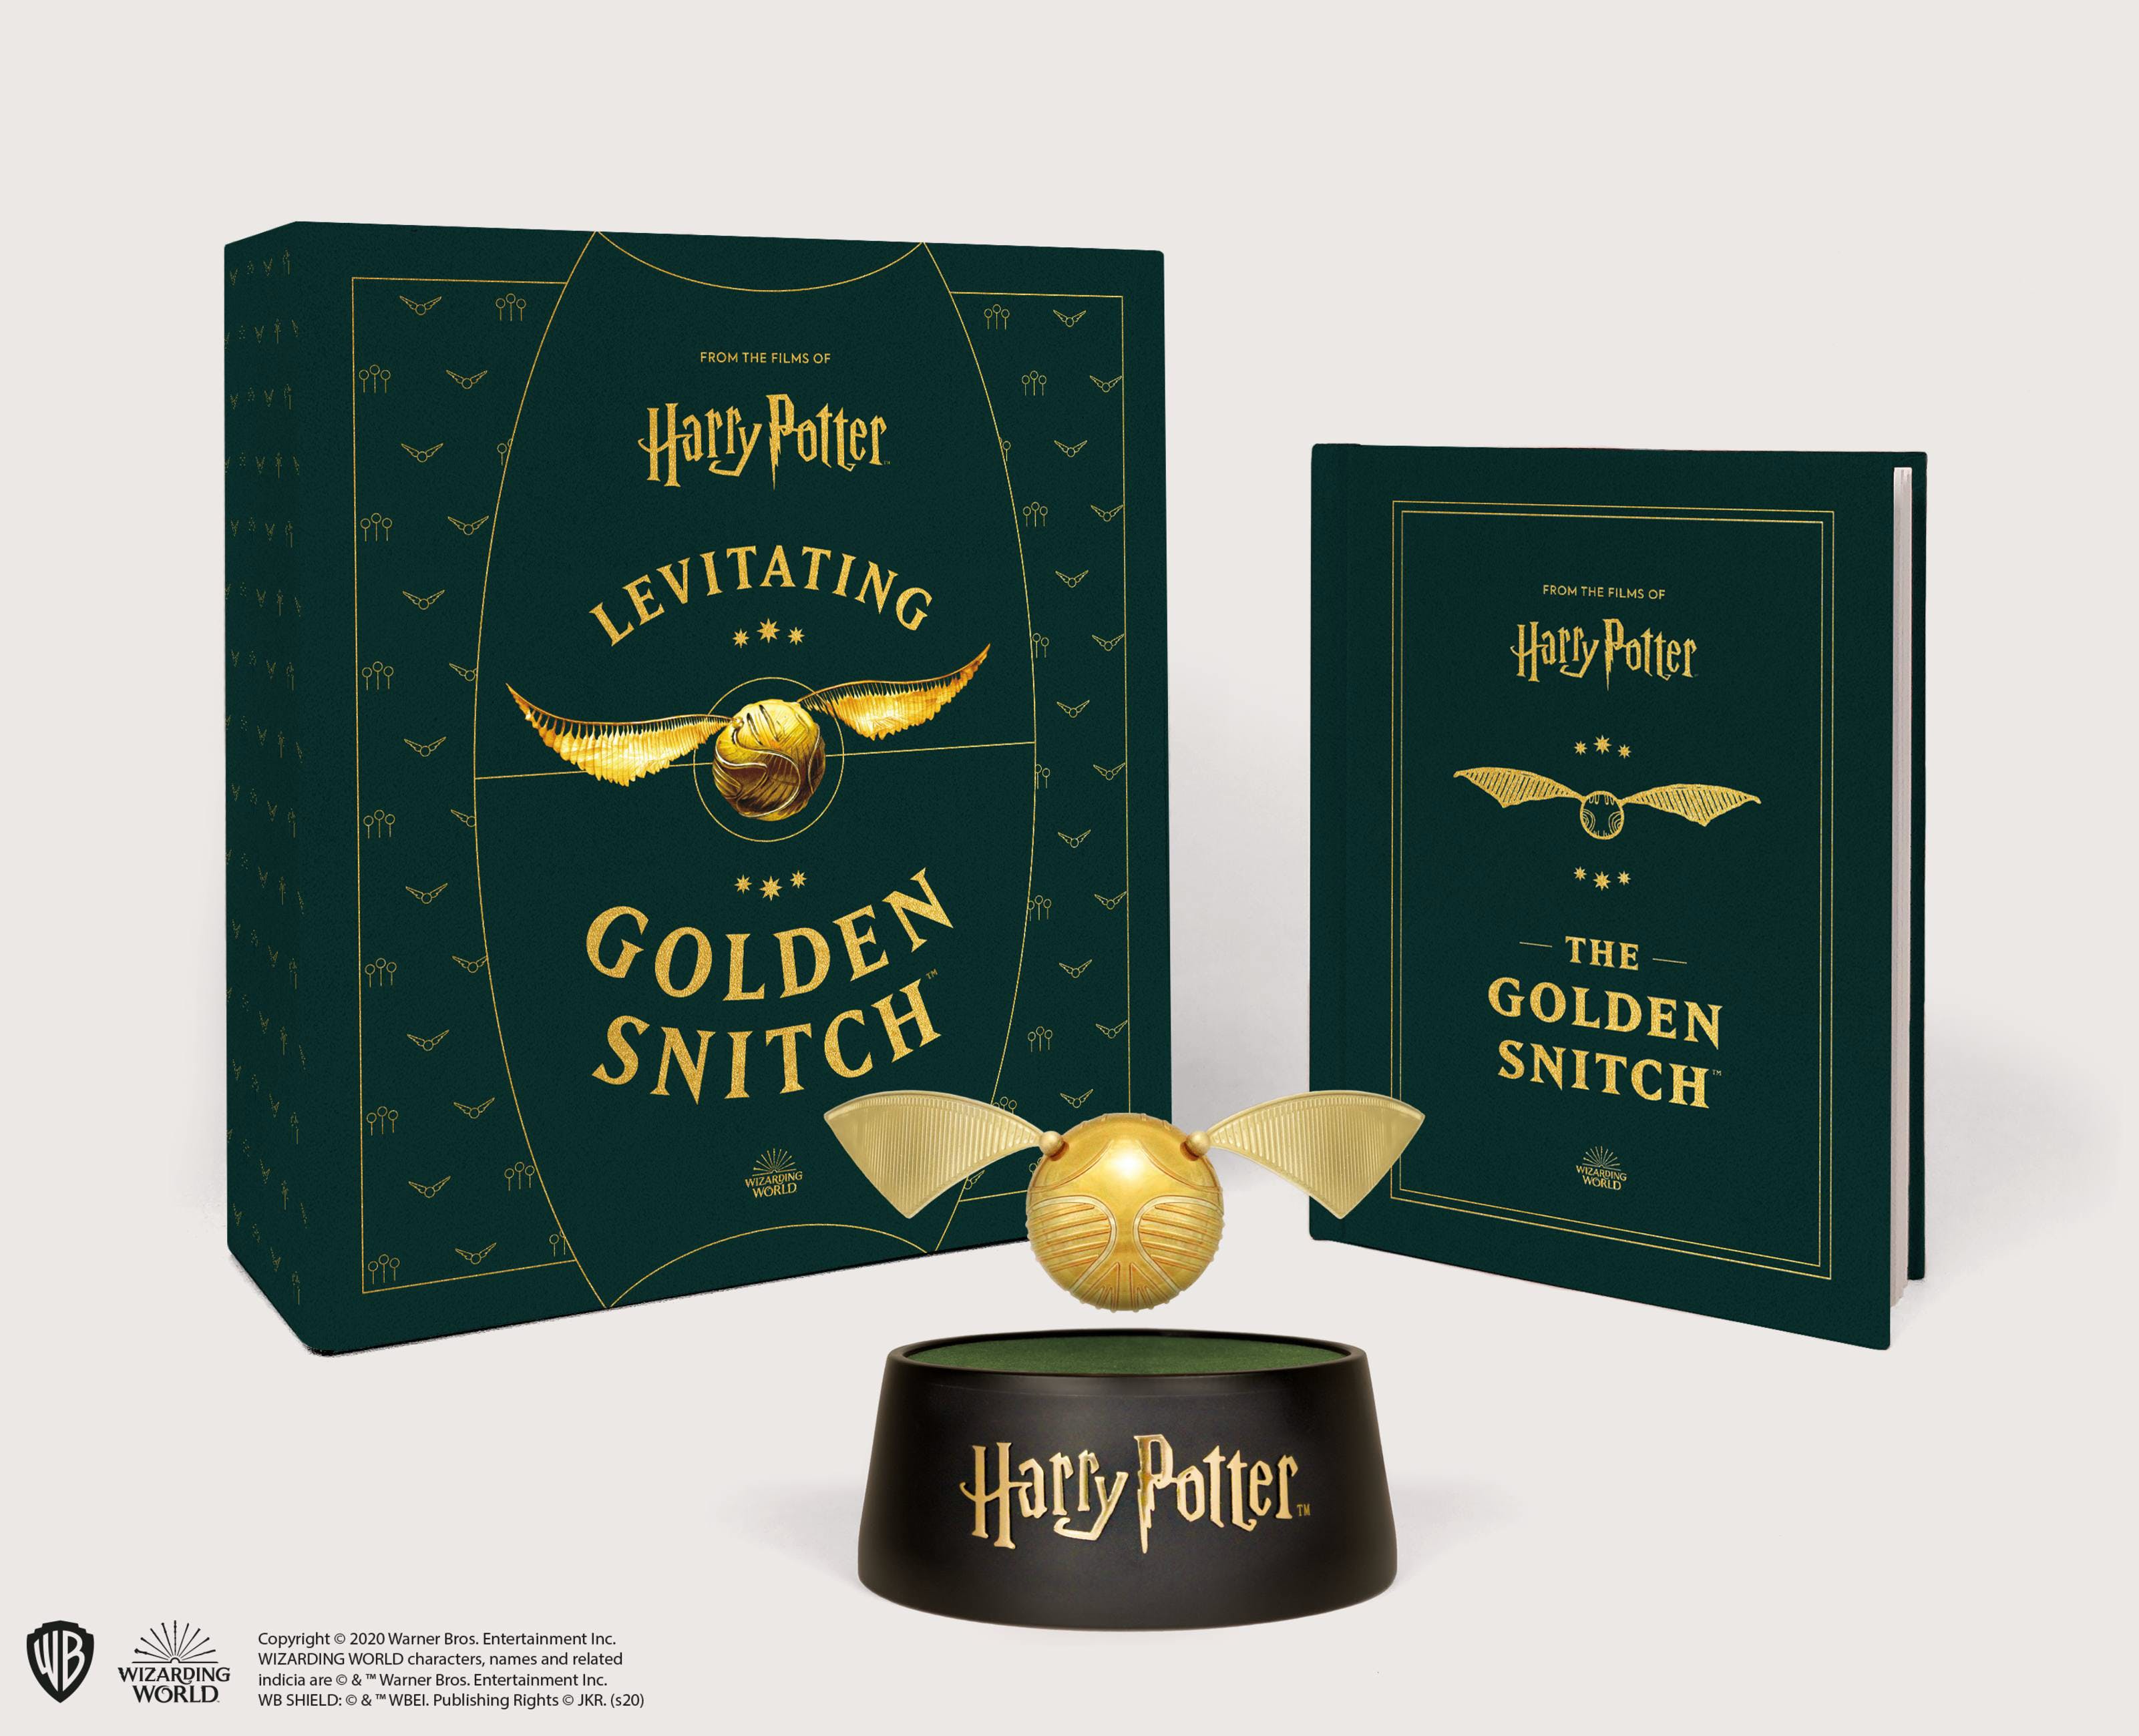 Harry Potter Levitating Golden Snitch | Warner Bros. Consumer Products